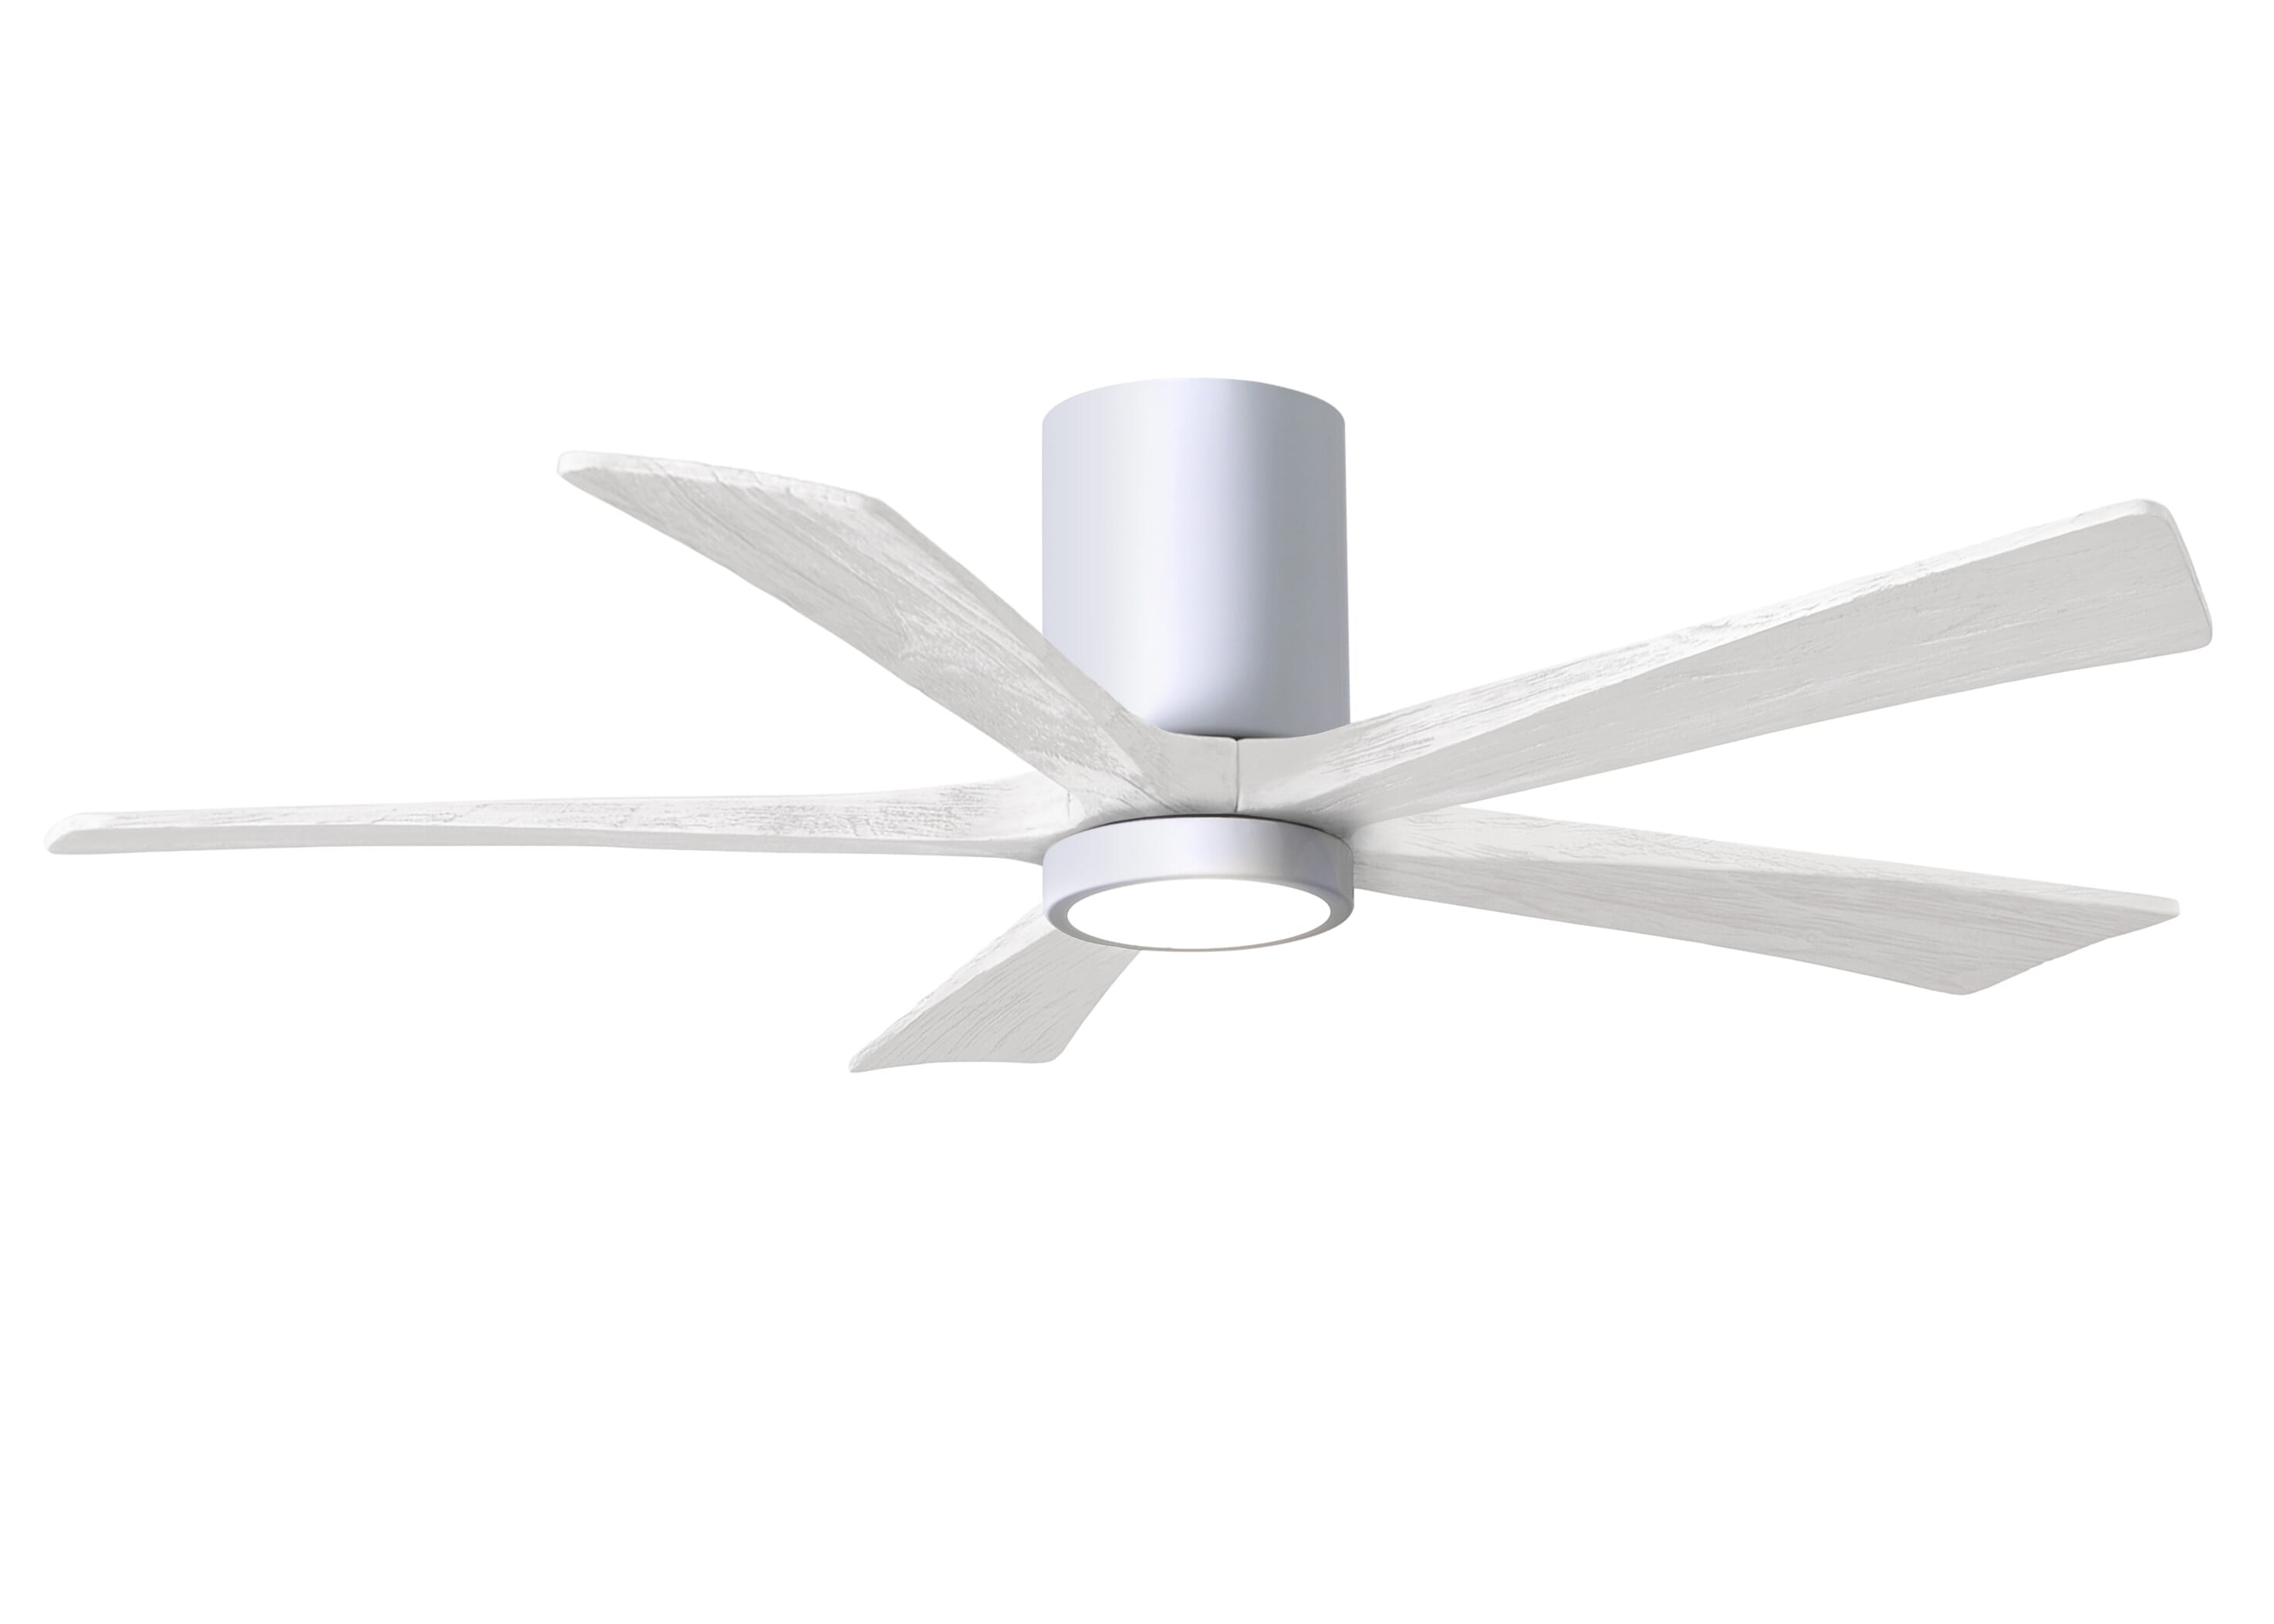 Irene 6-Speed DC 52"" Ceiling Fan w/ Integrated Light Kit in White with Matte White blades -  Matthews Fan Company, IR5HLK-WH-MWH-52